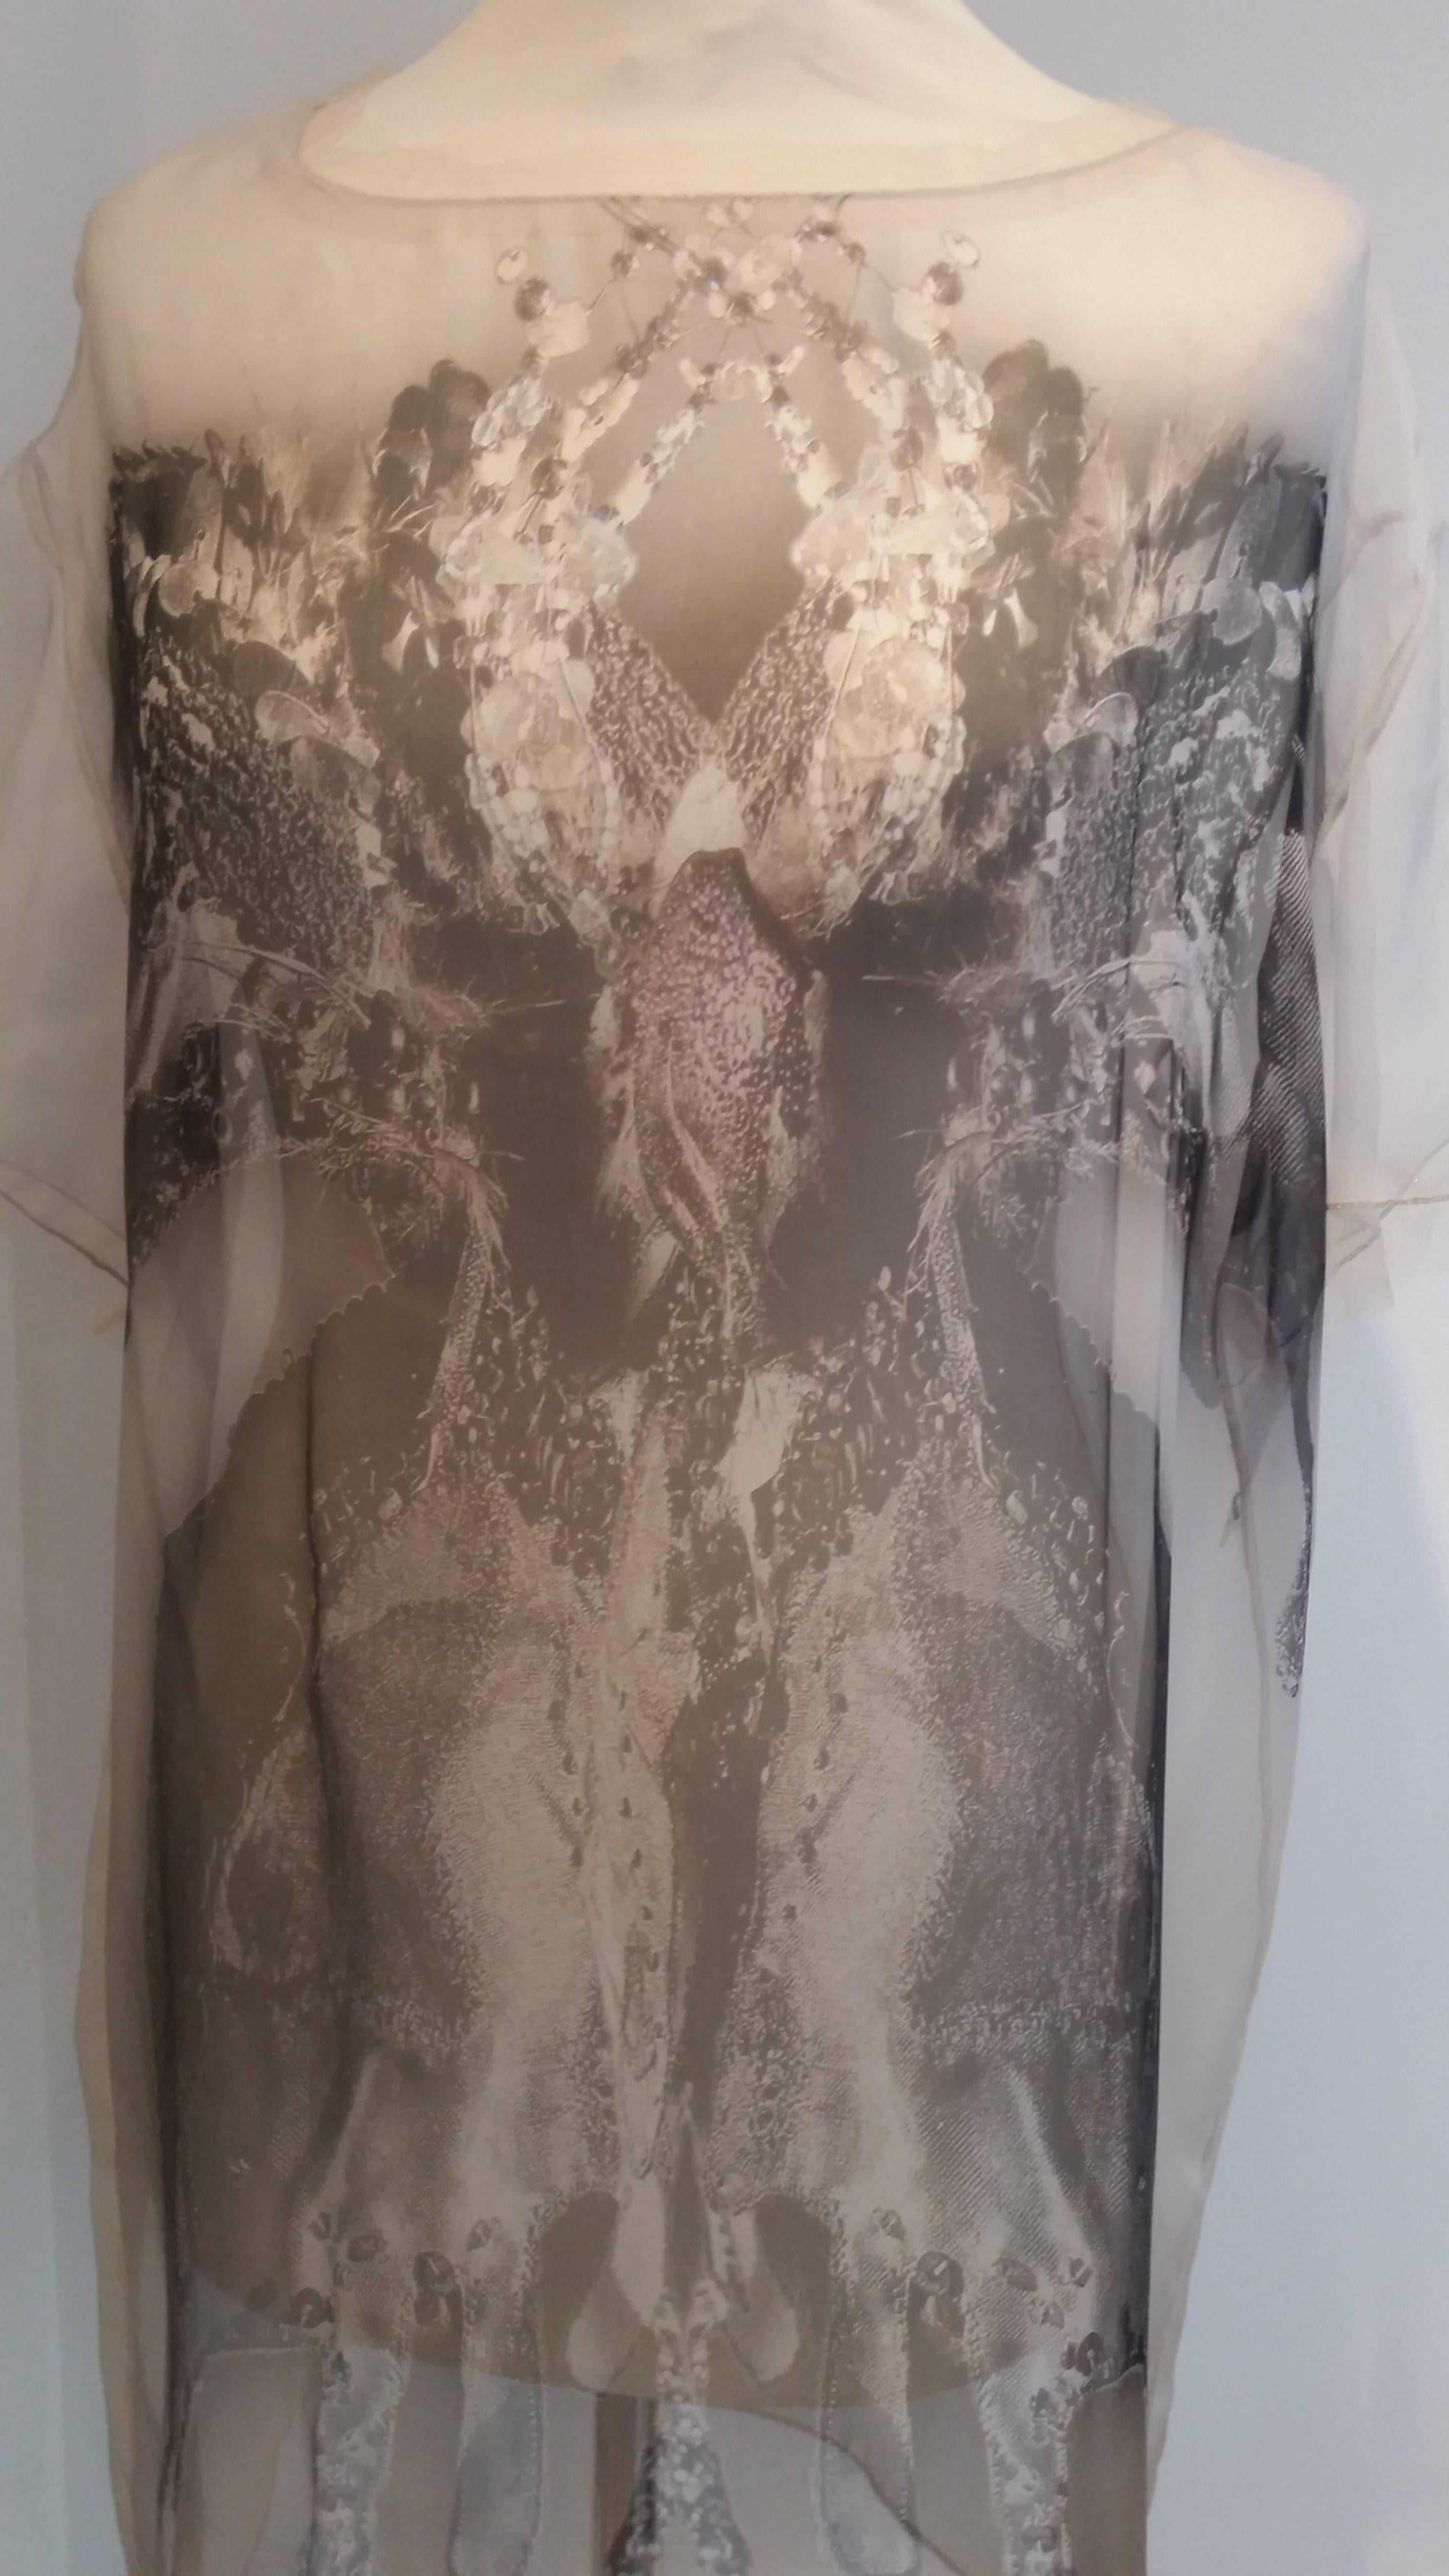 Valentino Printed Silk Chiffon mini dress with underslip. Can also we worn as a tunic.
Mesh sleeves and neckline with gold shimmer stitching.
Photographed the dress with/without the underslip.
The underslip is grey mesh fabric (100% silk)

Size